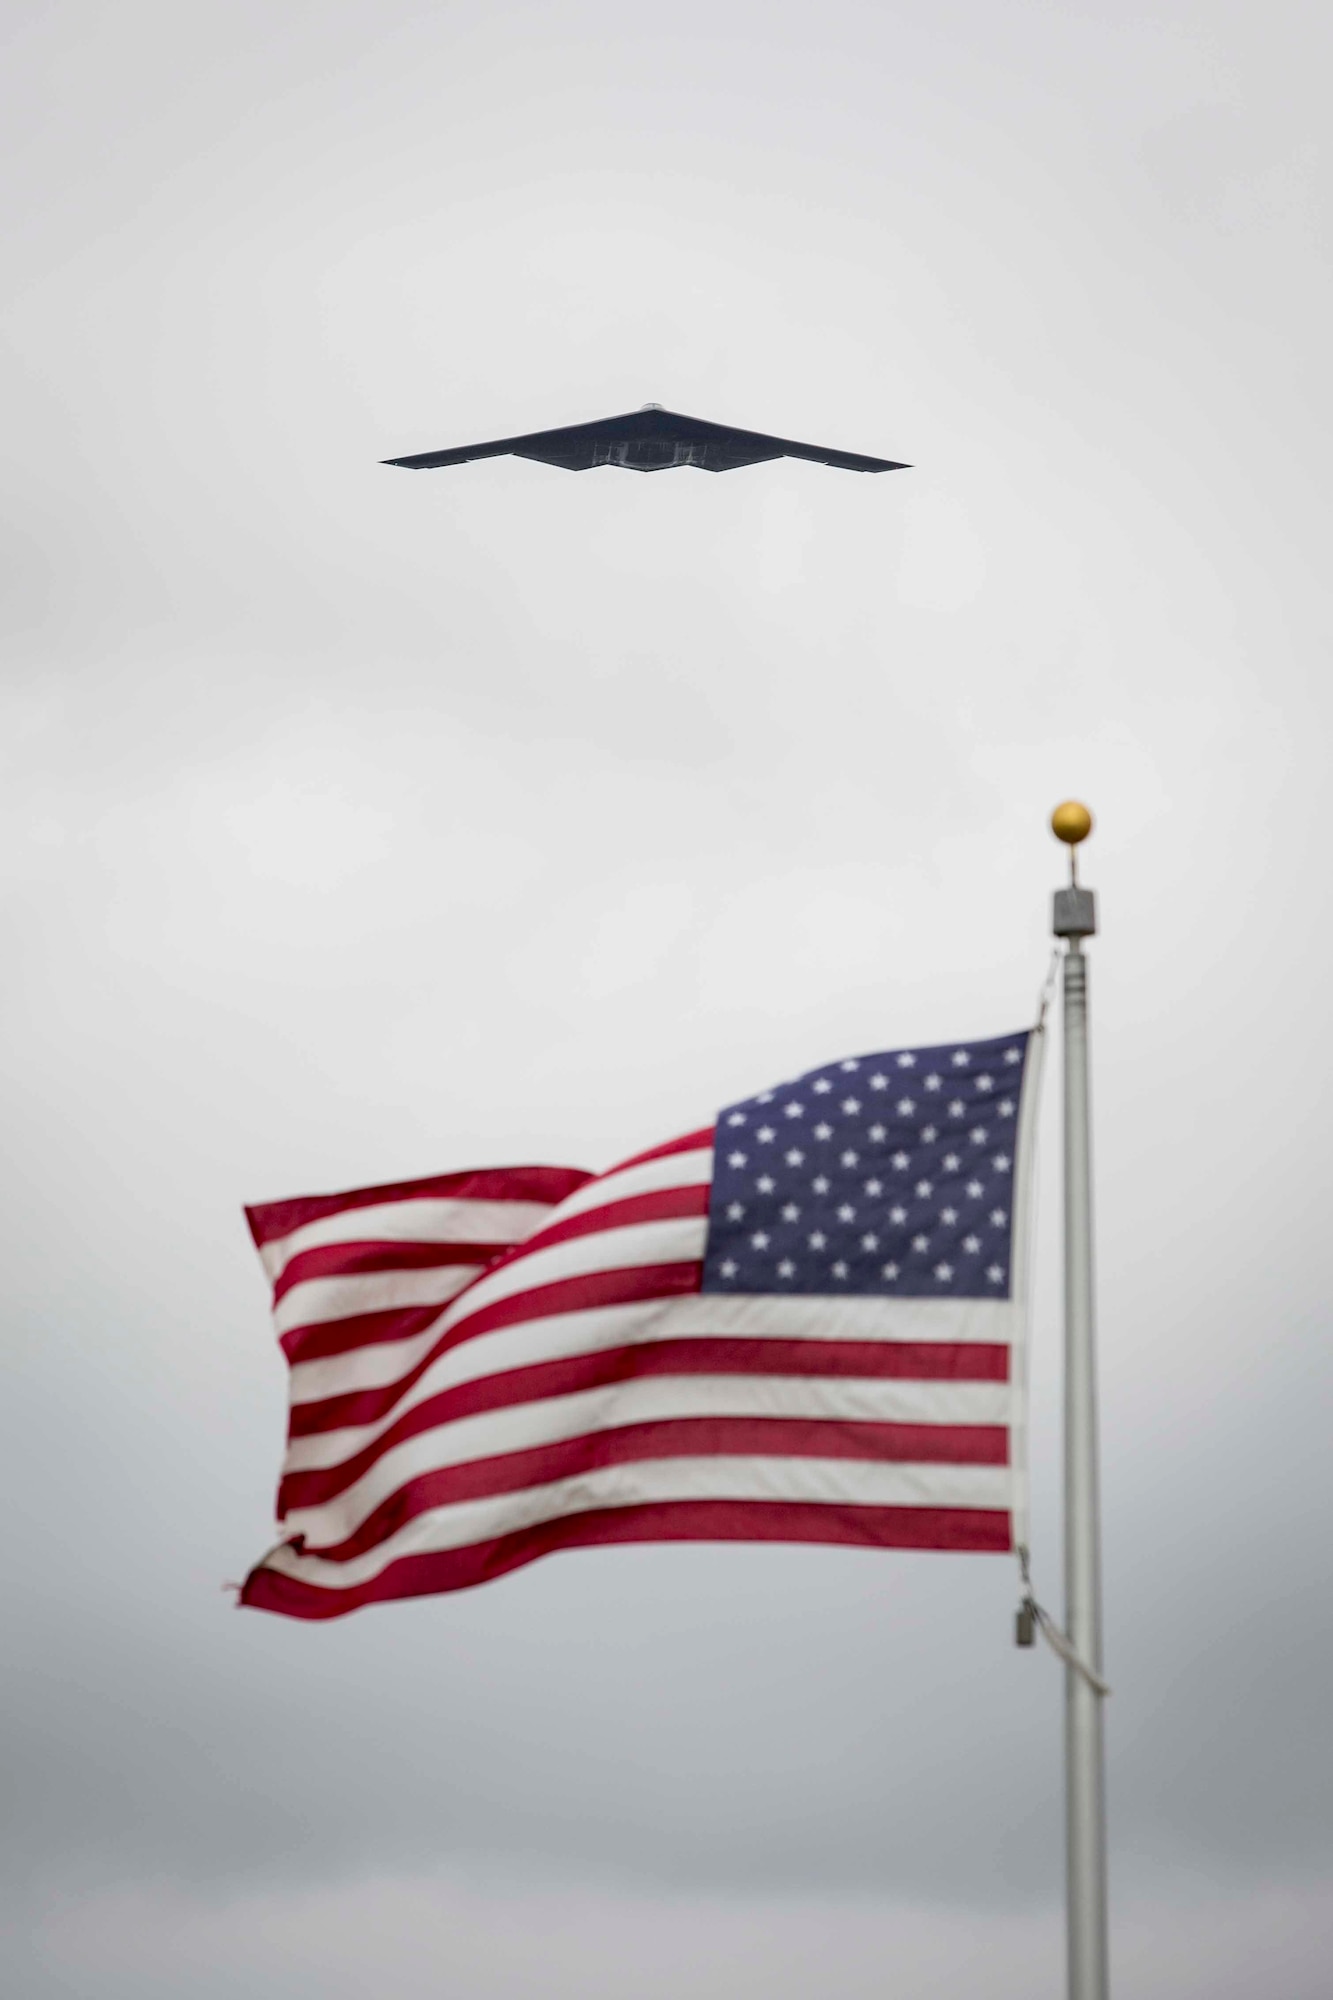 A B-2 Spirit conducts a memorial flyover during a memorial service for Air Force Brig. Gen. Robert Cardenas at the Miramar National Cemetery, San Diego, California, March 31, 2022. Cardenas was born March 10, 1920, and passed away March 10, 2022. (U.S. Marine Corps photo by Lance Cpl. Jose S. GuerreroDeLeon)